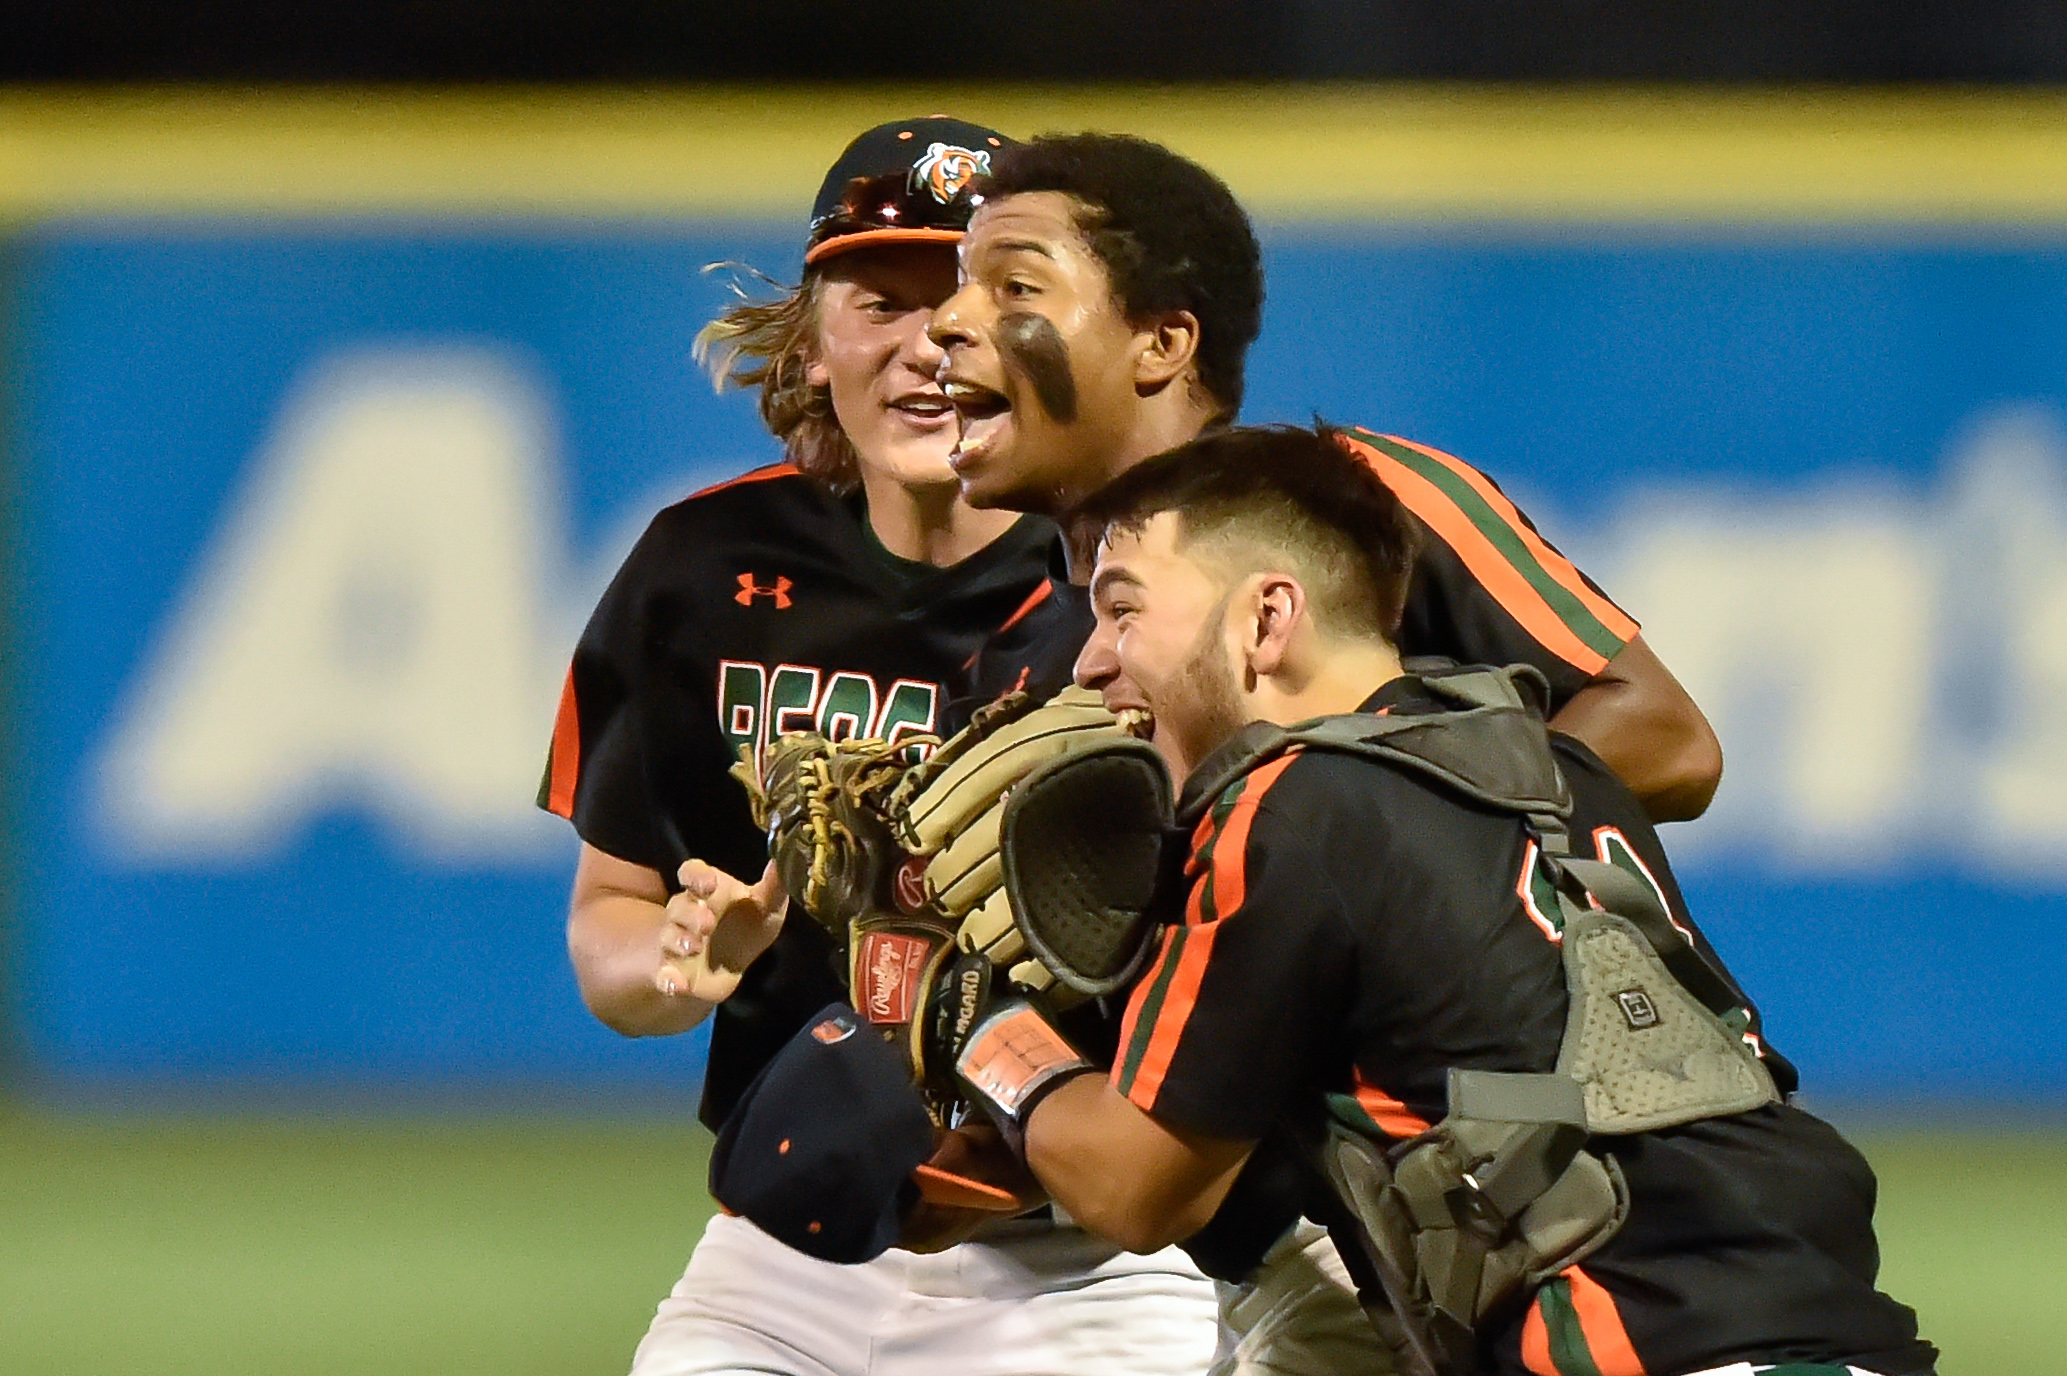 Plainfield East players celebrate winning the IHSA 4A State Title game against Lake Park.